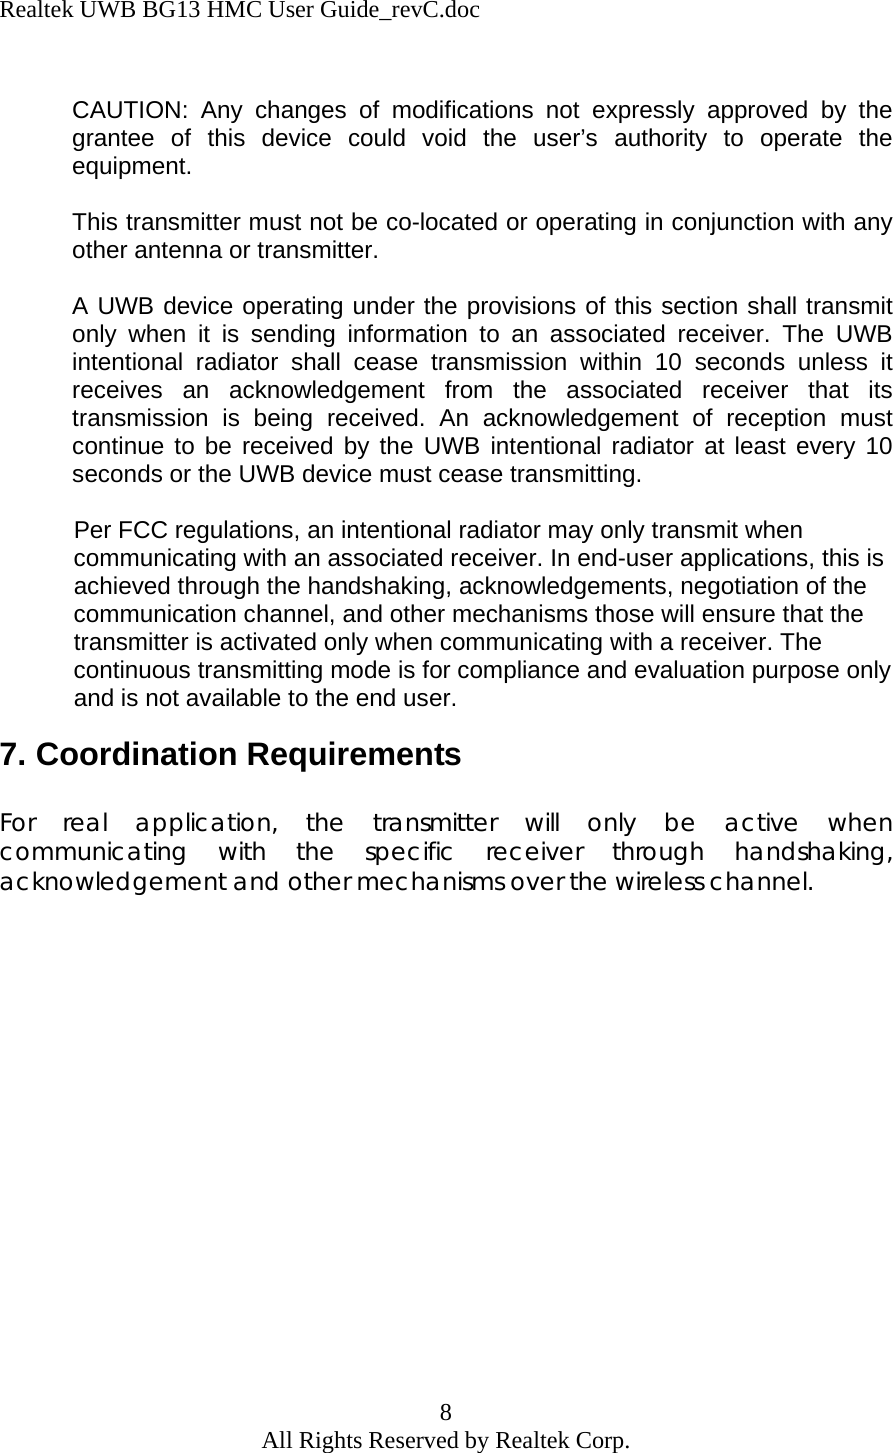 Realtek UWB BG13 HMC User Guide_revC.doc 8 All Rights Reserved by Realtek Corp.  CAUTION: Any changes of modifications not expressly approved by the grantee of this device could void the user’s authority to operate the equipment.  This transmitter must not be co-located or operating in conjunction with any other antenna or transmitter.  A UWB device operating under the provisions of this section shall transmit only when it is sending information to an associated receiver. The UWB intentional radiator shall cease transmission within 10 seconds unless it receives an acknowledgement from the associated receiver that its transmission is being received. An acknowledgement of reception must continue to be received by the UWB intentional radiator at least every 10 seconds or the UWB device must cease transmitting.             Per FCC regulations, an intentional radiator may only transmit when                           communicating with an associated receiver. In end-user applications, this is             achieved through the handshaking, acknowledgements, negotiation of the             communication channel, and other mechanisms those will ensure that the             transmitter is activated only when communicating with a receiver. The             continuous transmitting mode is for compliance and evaluation purpose only             and is not available to the end user. 7. Coordination Requirements  For real application, the transmitter will only be active when communicating with the specific receiver through handshaking, acknowledgement and other mechanisms over the wireless channel.  